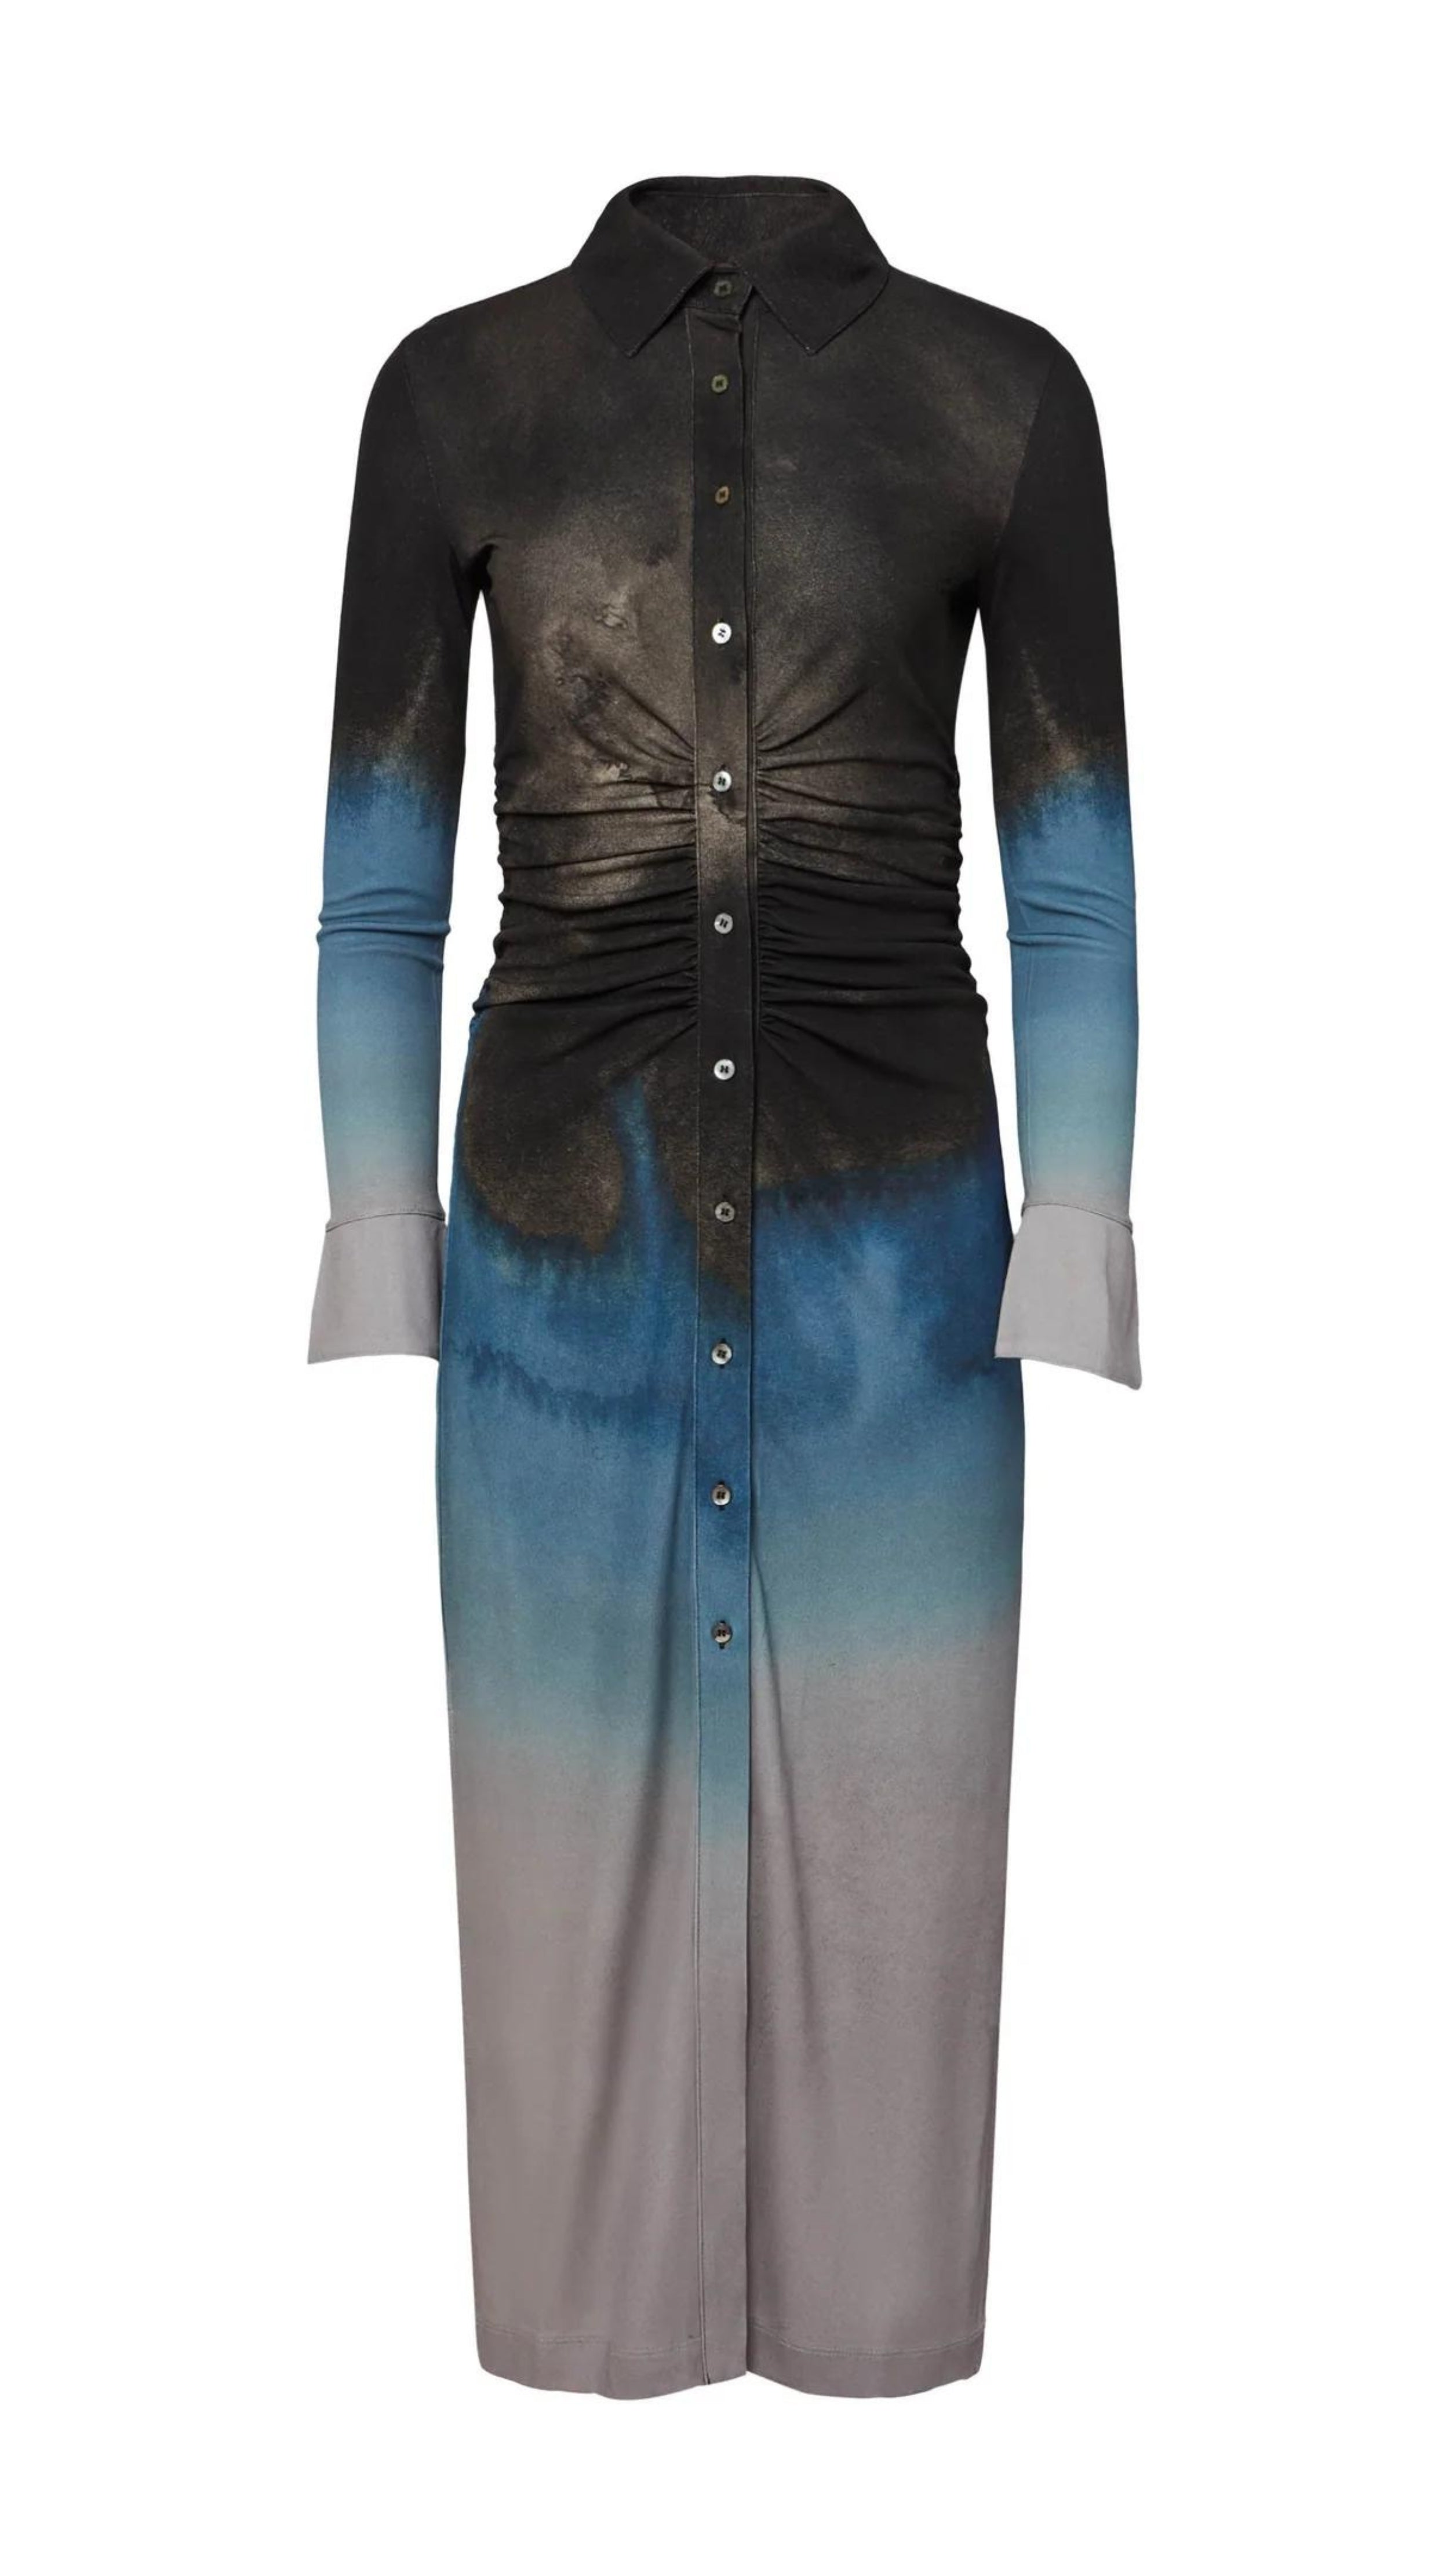 Altuzarra Claudia Dress in Eventide Made from jersey fabric, it is a slim-fitting midi dress featuring ruched detail at the waist, shirt dress buttons up the front, and side slits at the hem. The color is an ombre of deep grey, blue, and pale grey. Product photo facing front.